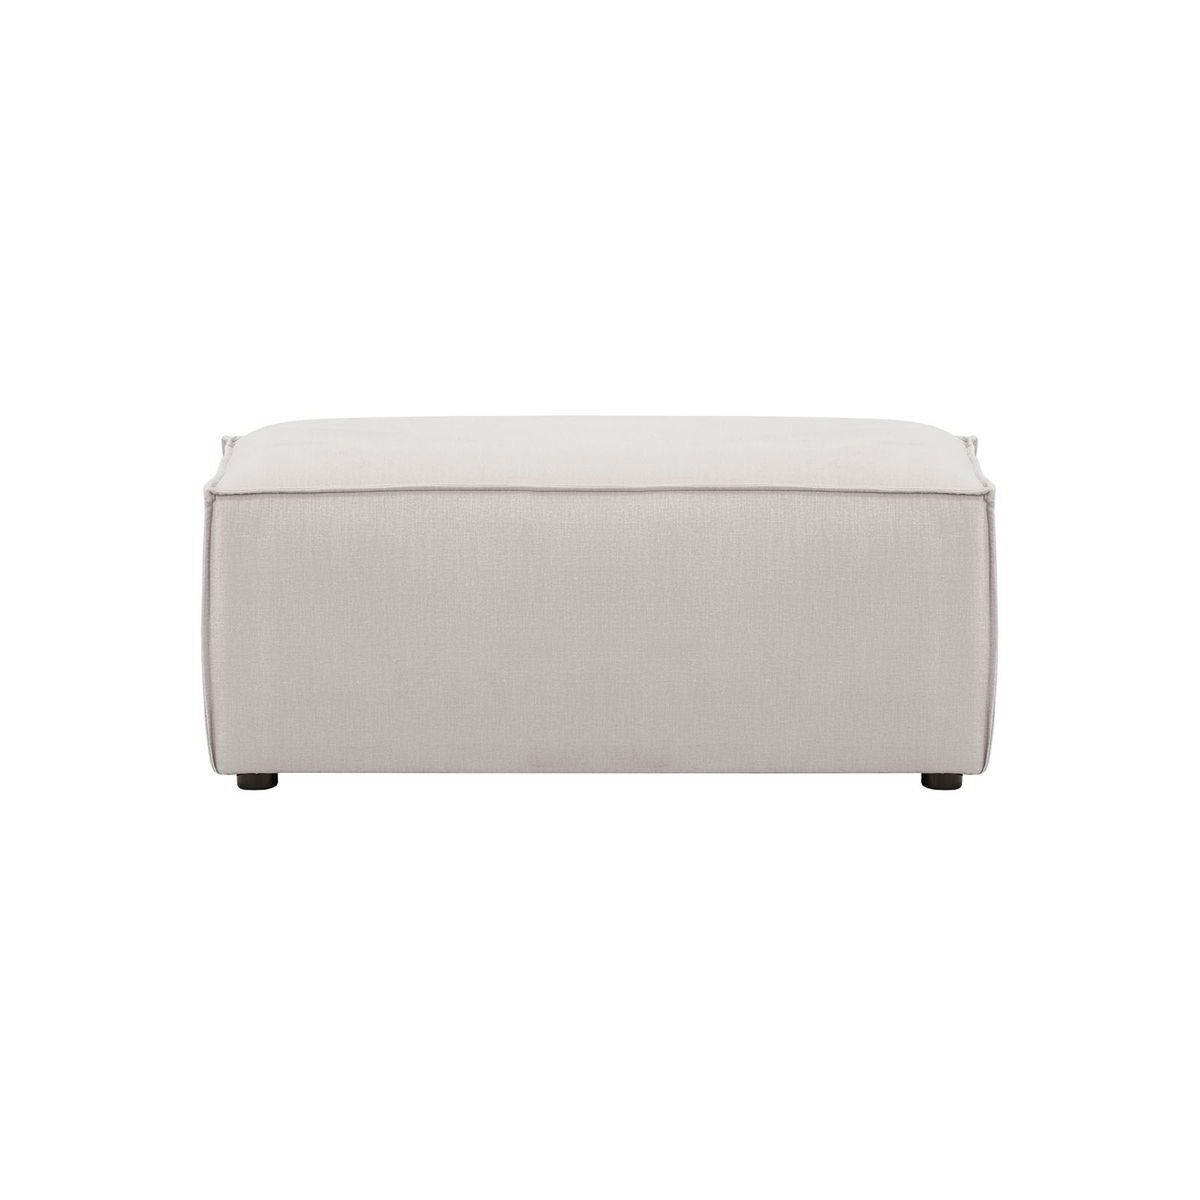 Charles Large Pouffe (P3), beige - image 1